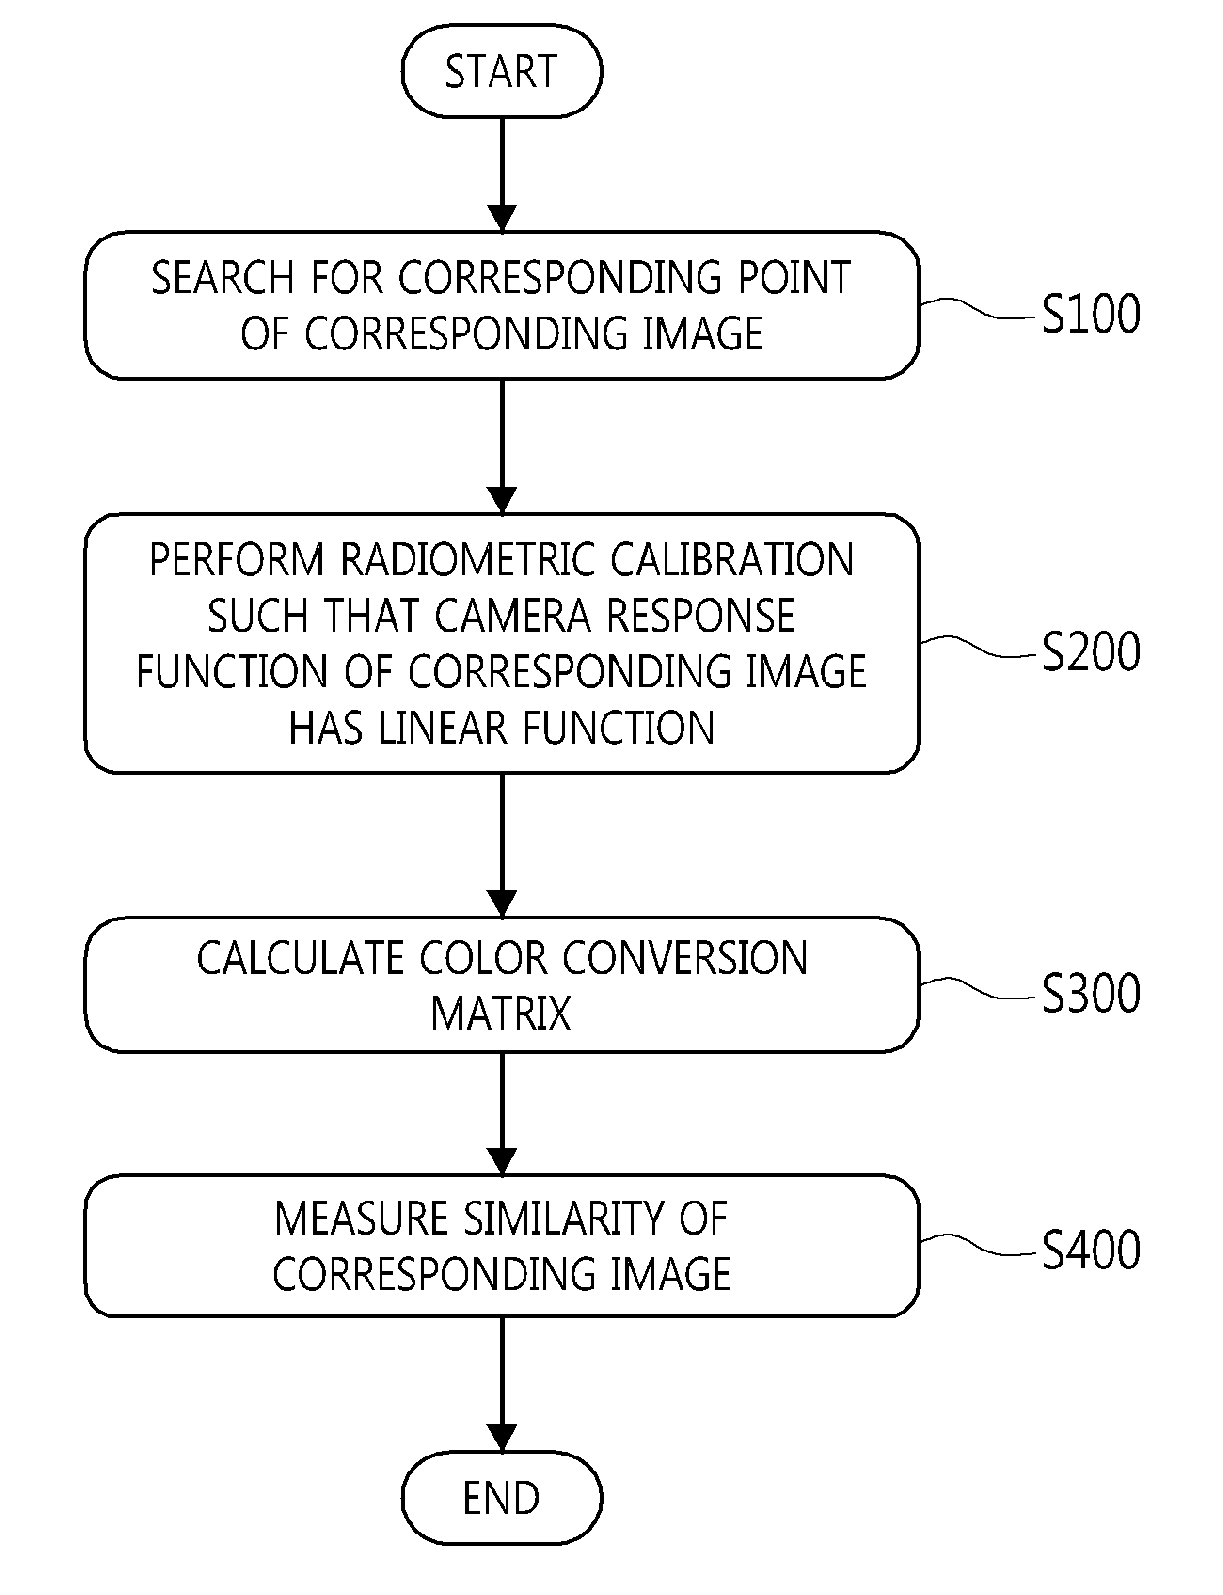 Corresponding image processing method for compensating colour